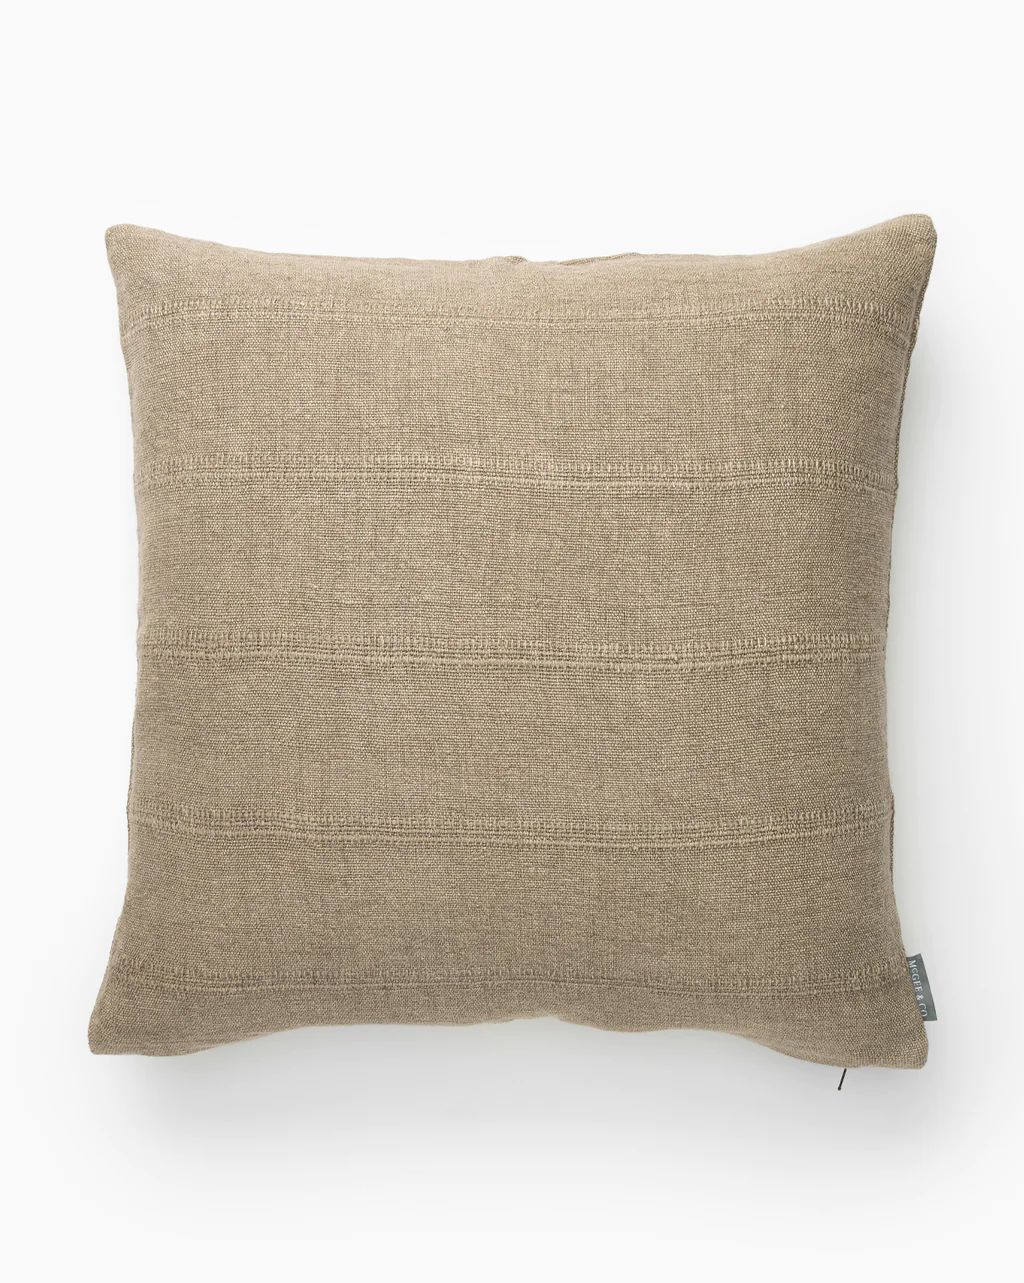 Gillespie Pillow Cover | McGee & Co. (US)